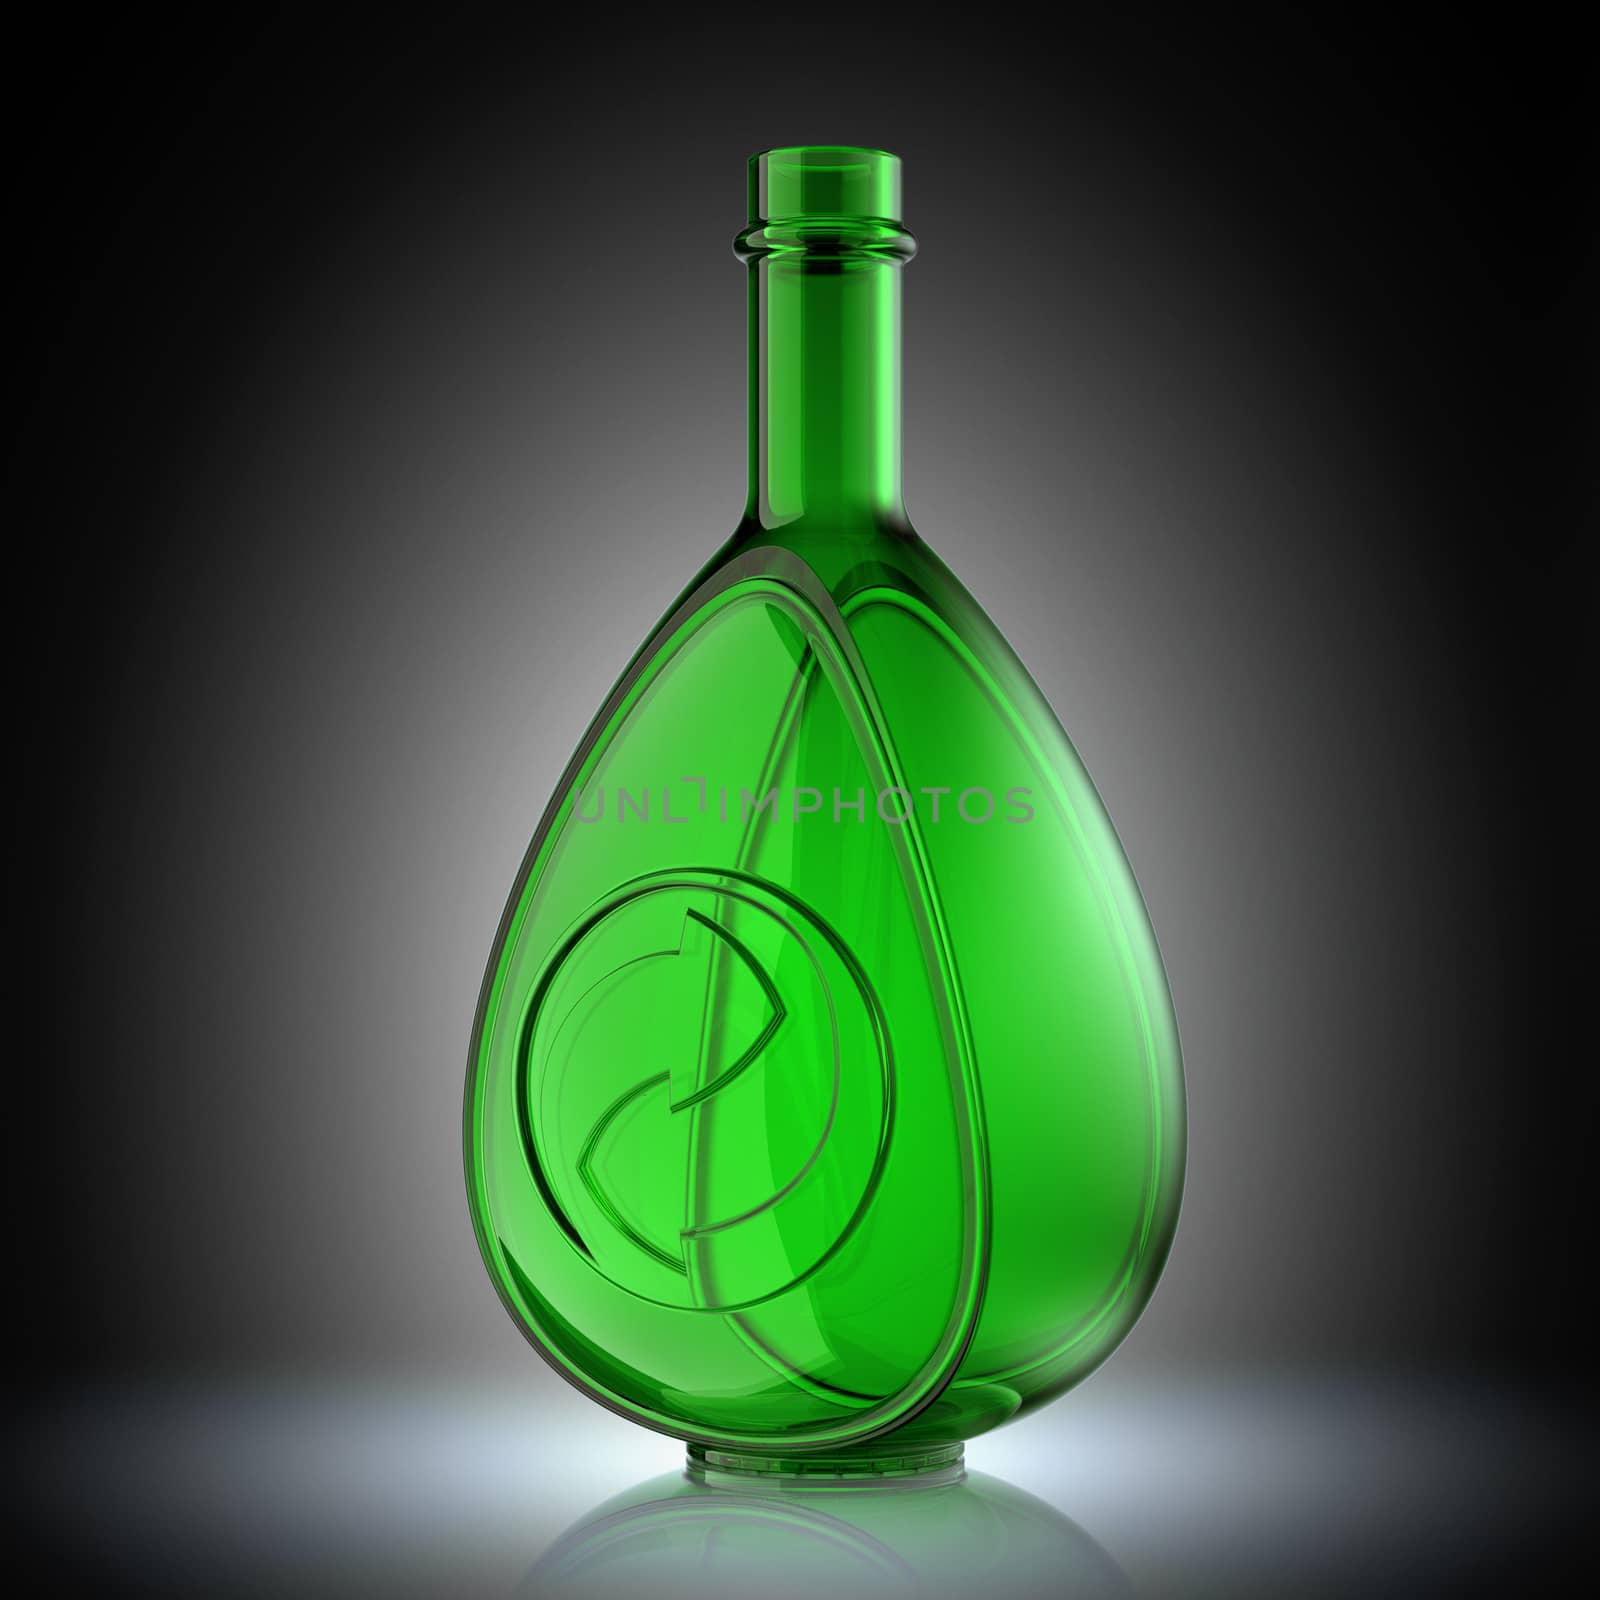 Ecology and recycle concept with glass bottle and recycling symb by Arsgera